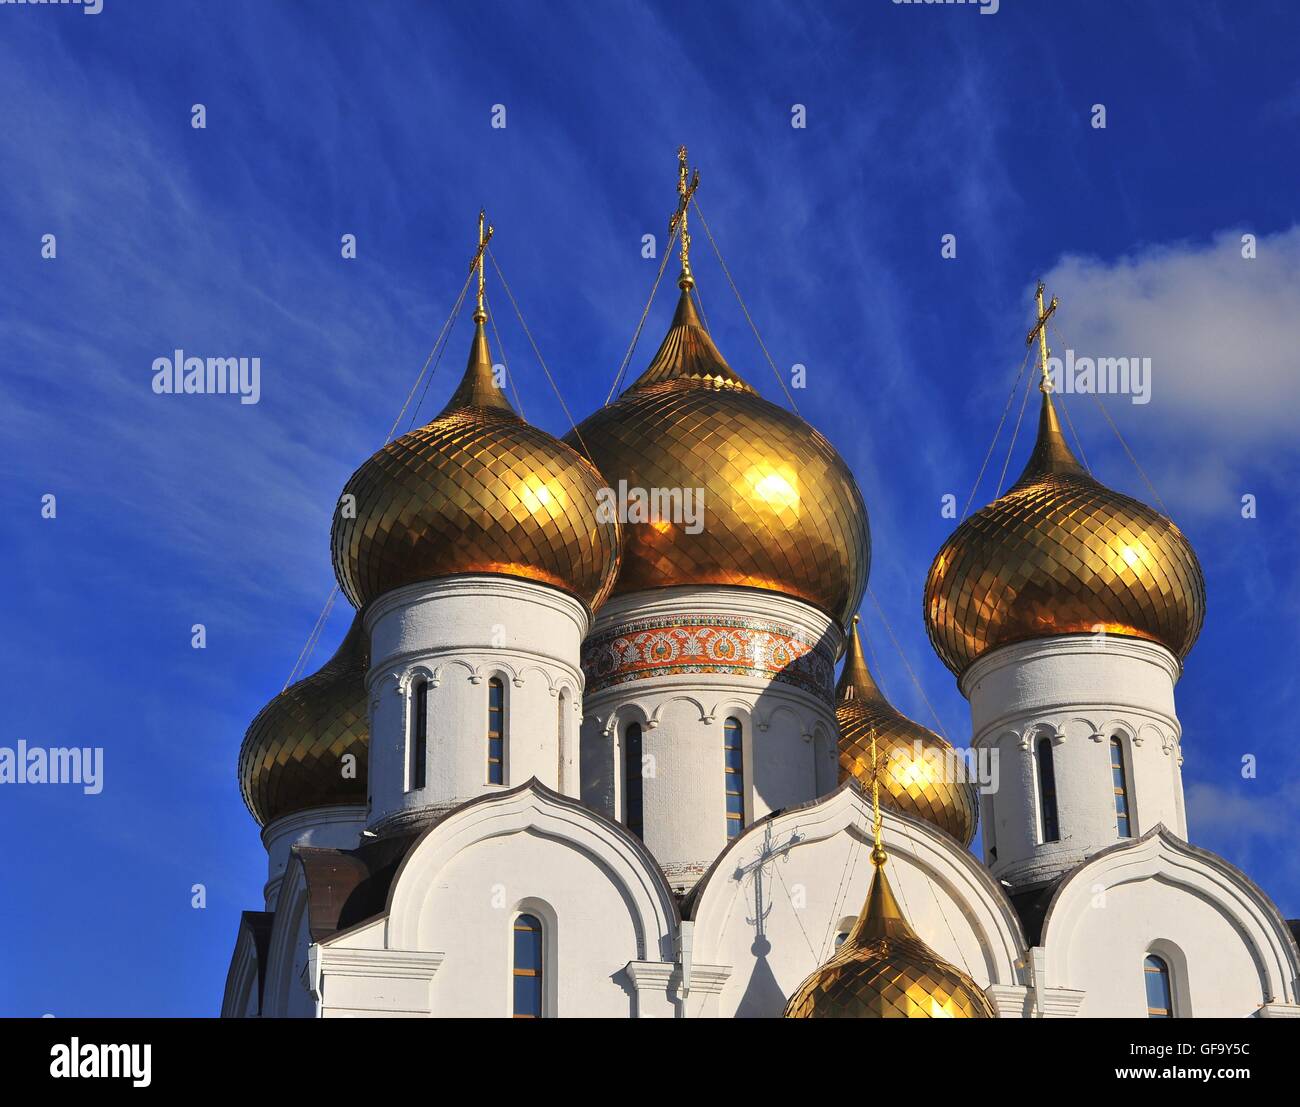 Dome of Yaroslavl cathedral Stock Photo